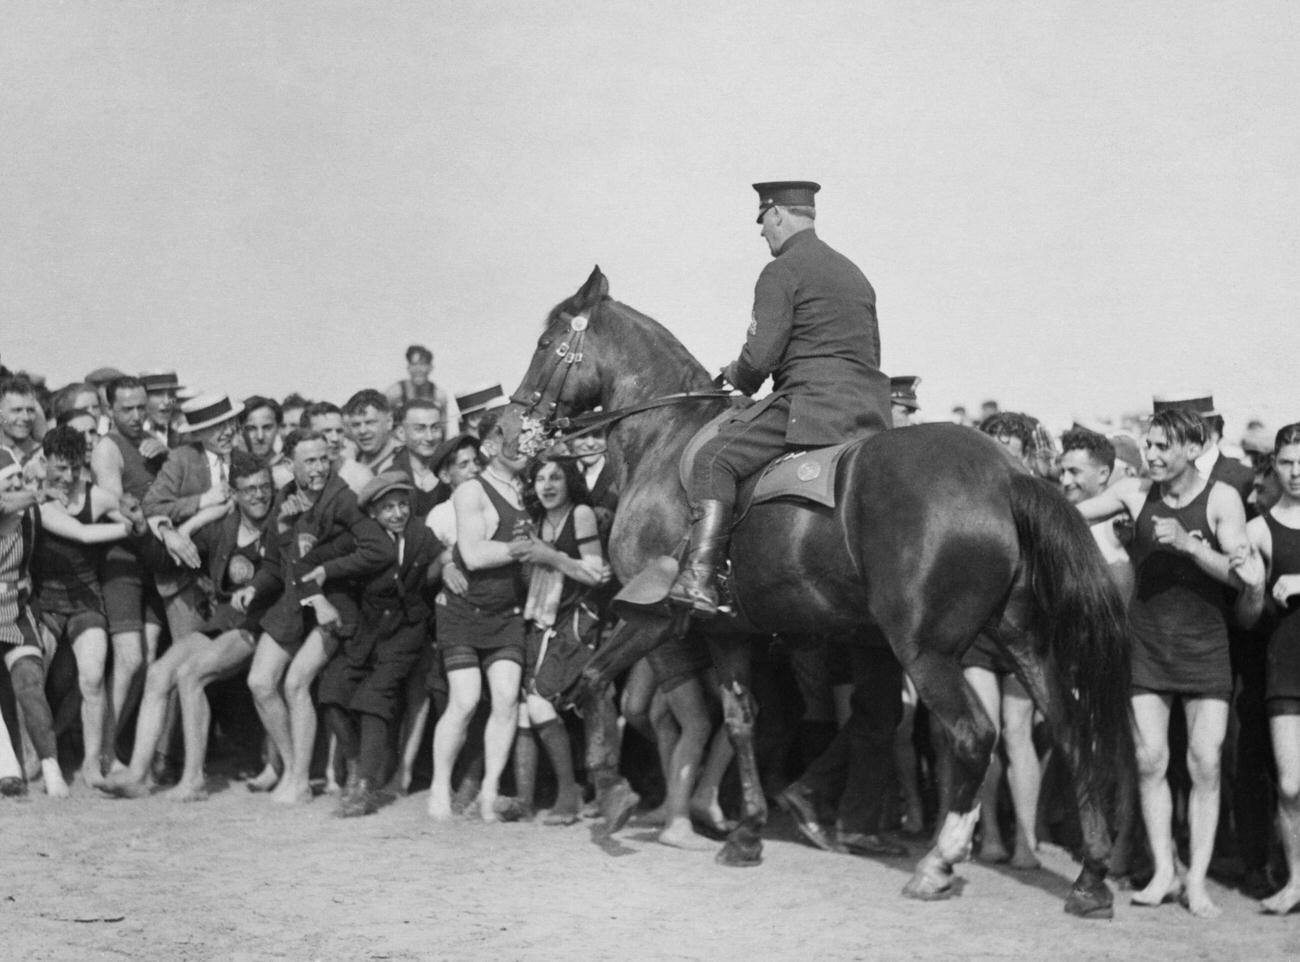 Mounted Police Officer Manages Crowd On New Boardwalk, Circa 1935